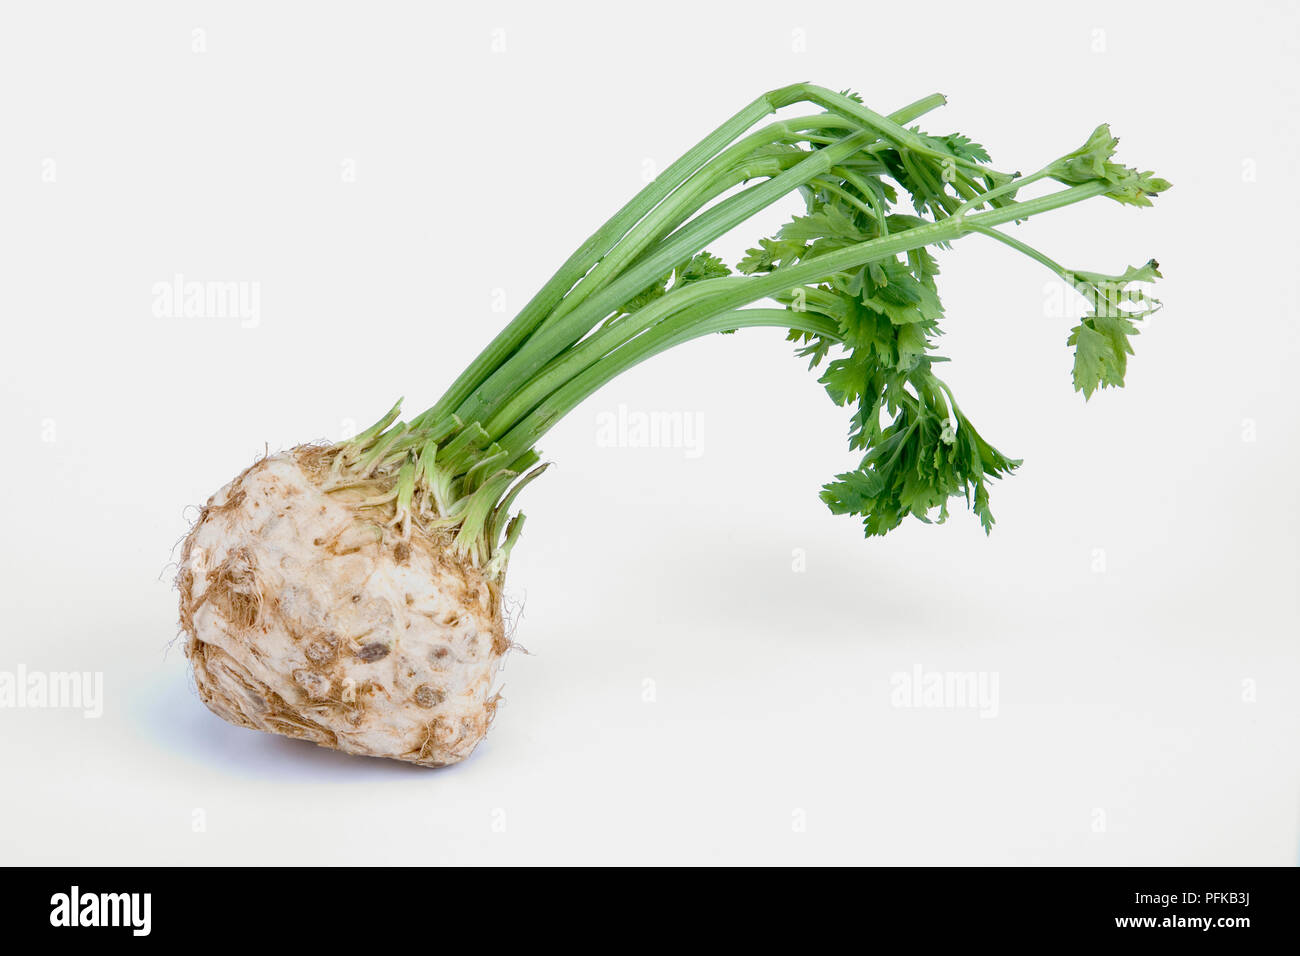 Celeriac with leafy stems attached Stock Photo